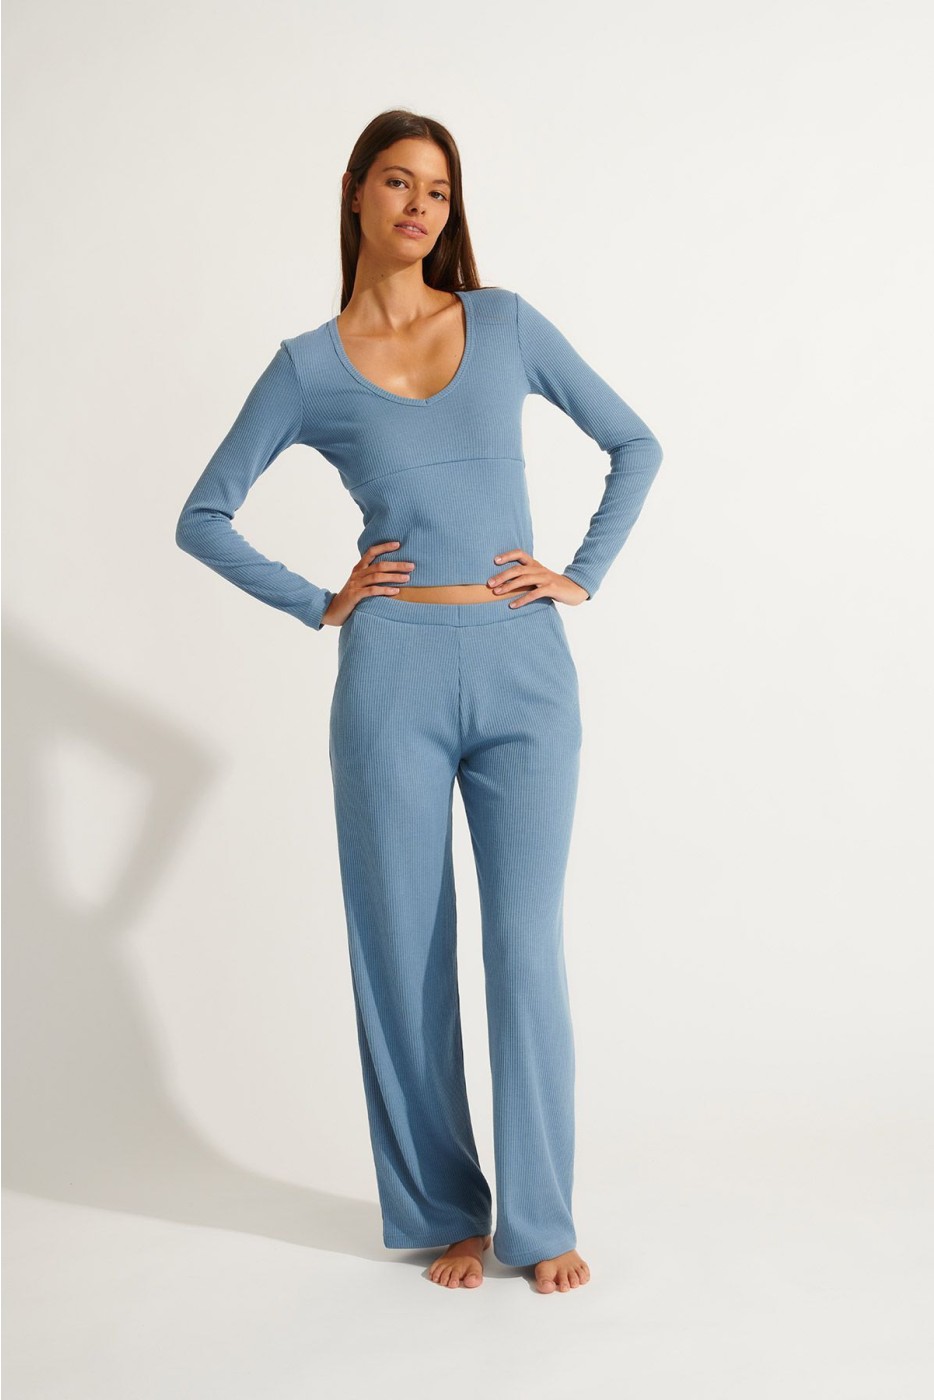 BONDY PASSION blue ribbed trousers